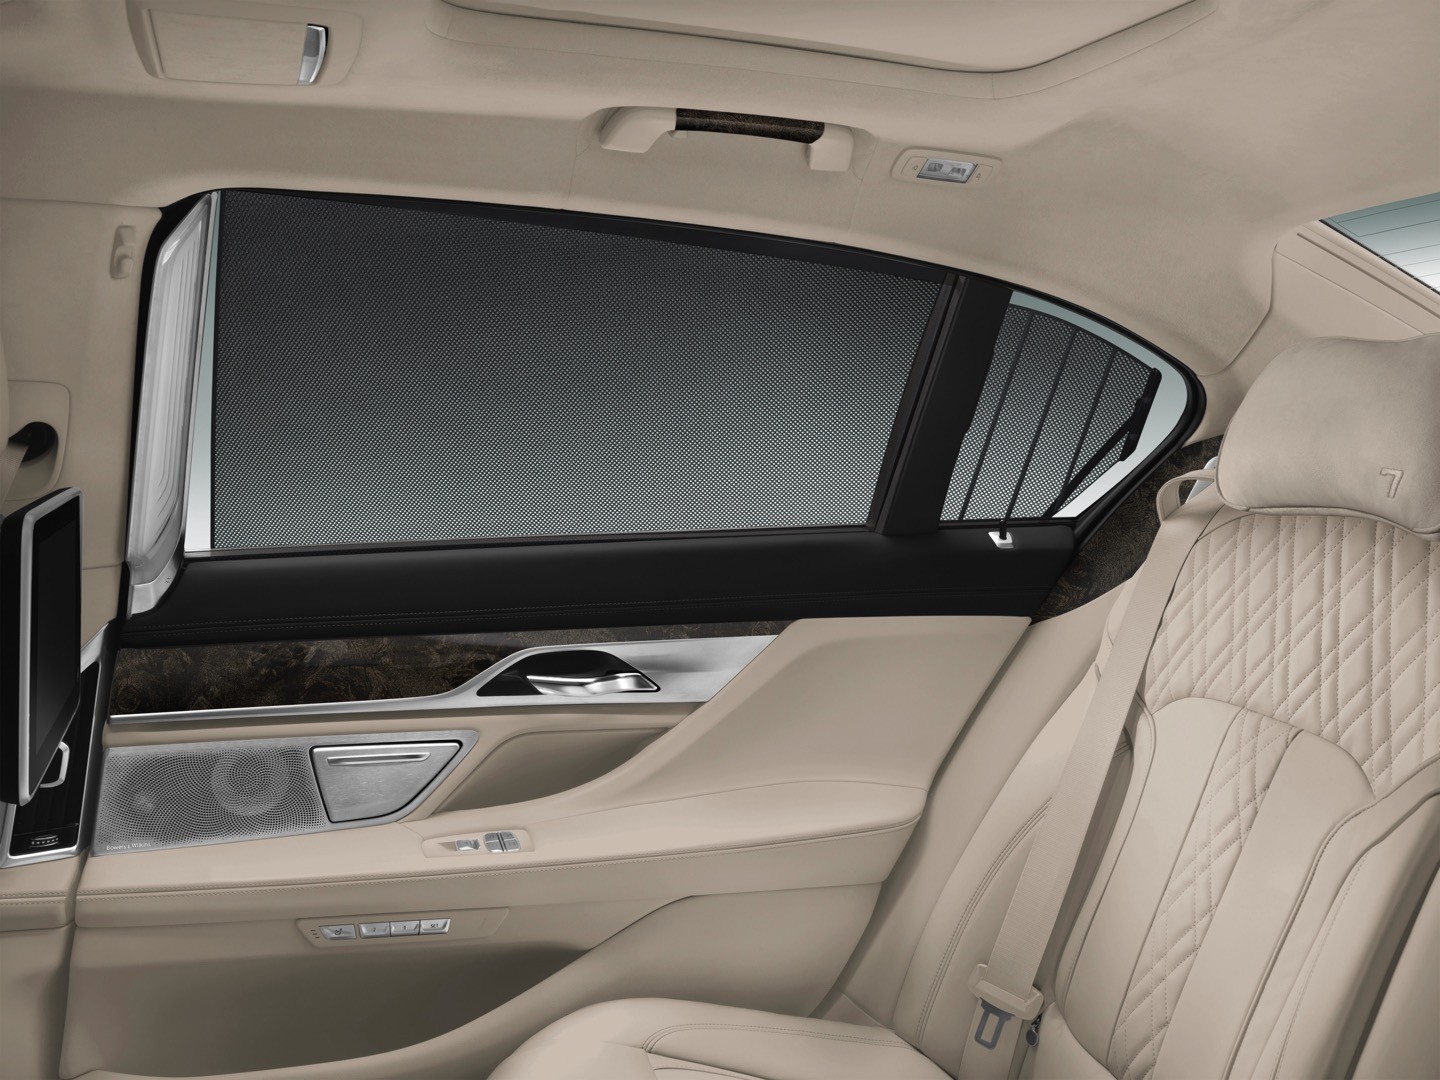 2016-bmw-7-series-finally-officially-unveiled-the-good-stuffs-inside-photo-gallery_117